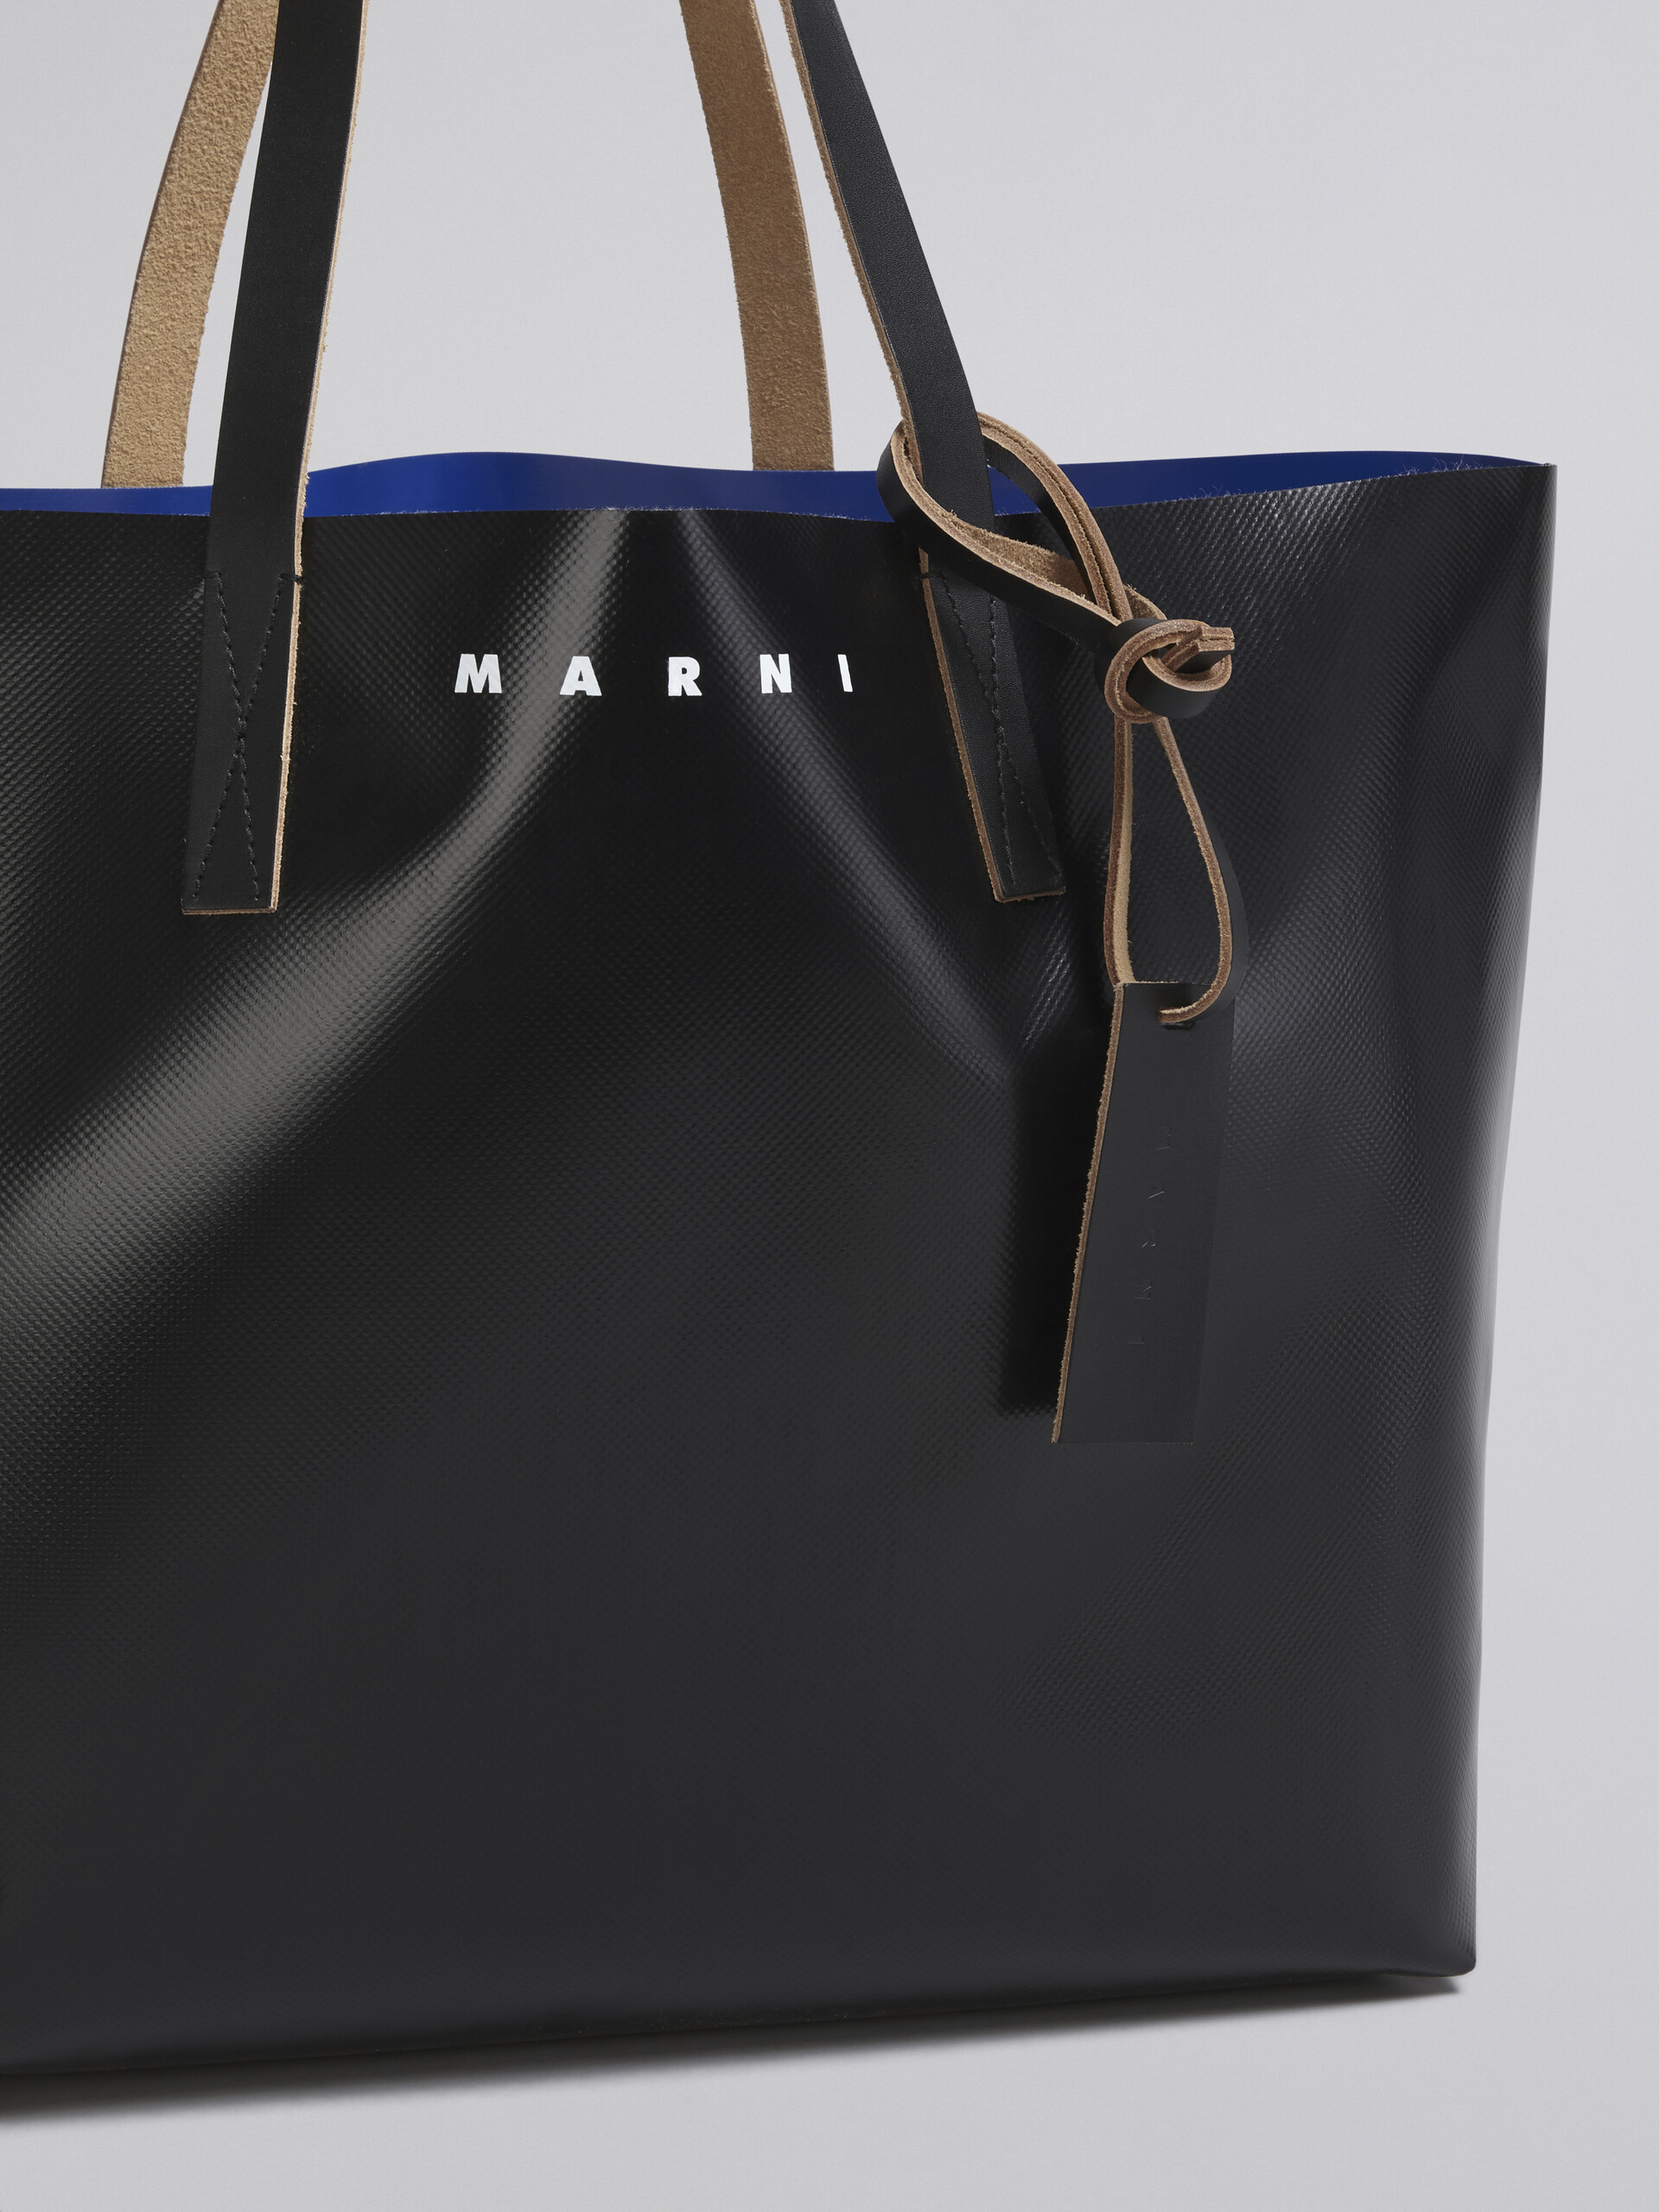 Black and blue TRIBECA shopping bag - Shopping Bags - Image 4